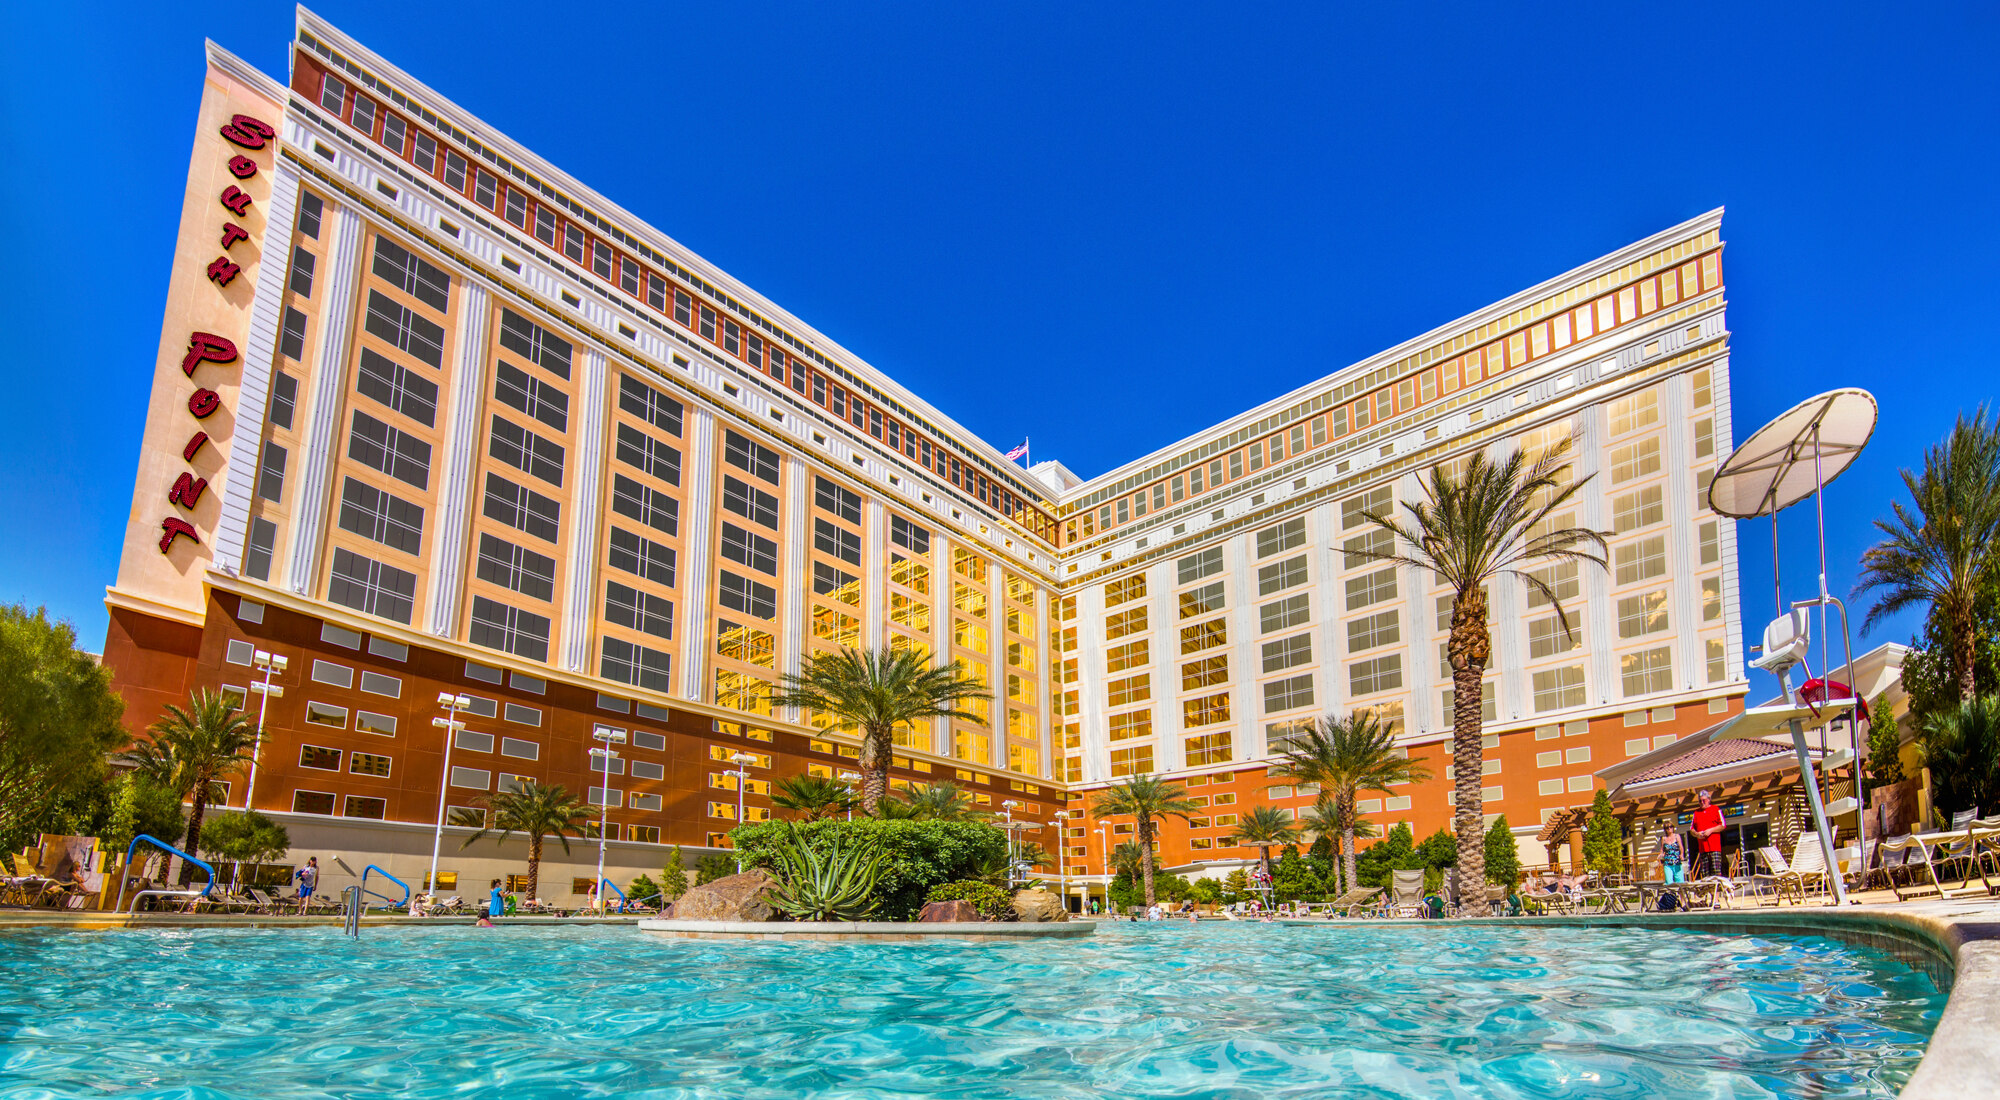 Las Vegas Hotel - South Point Hotel Casino and Spa